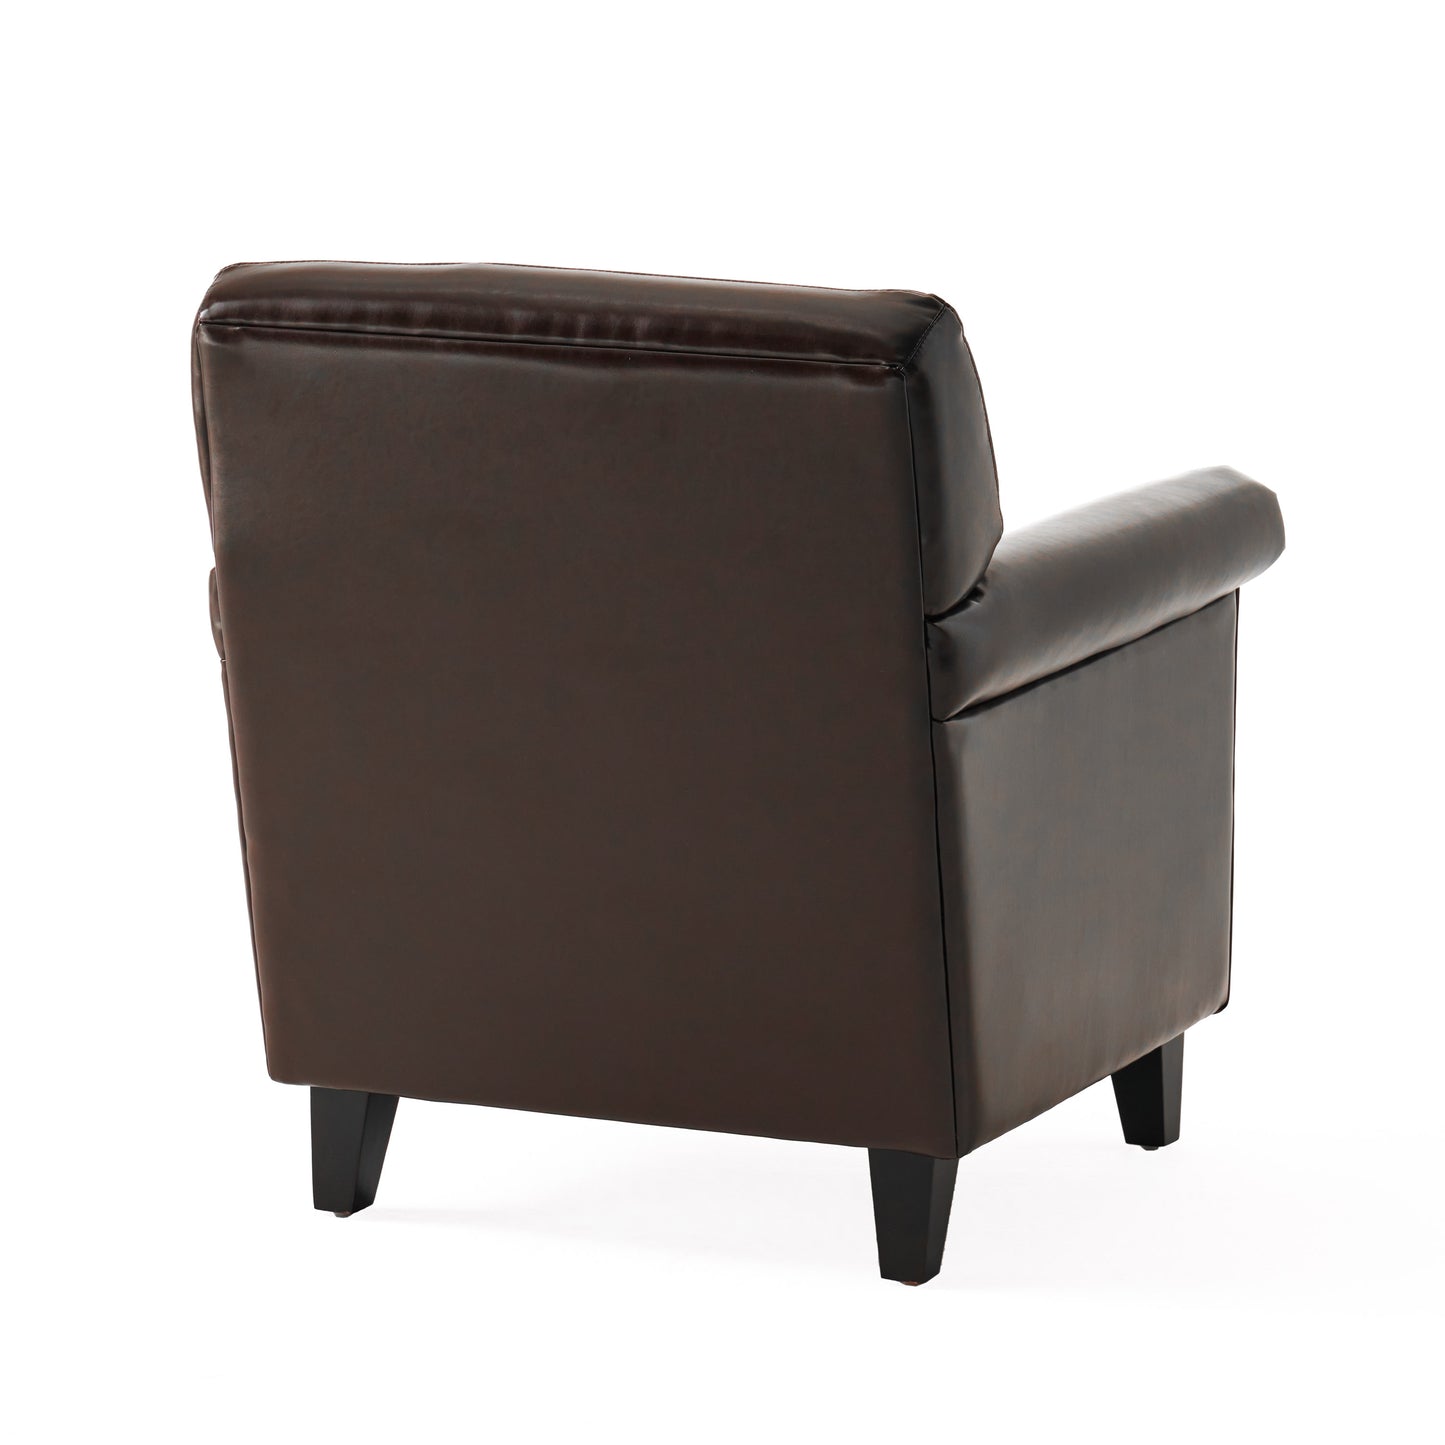 Bristol Classic Brown Bonded Leather Club Chair